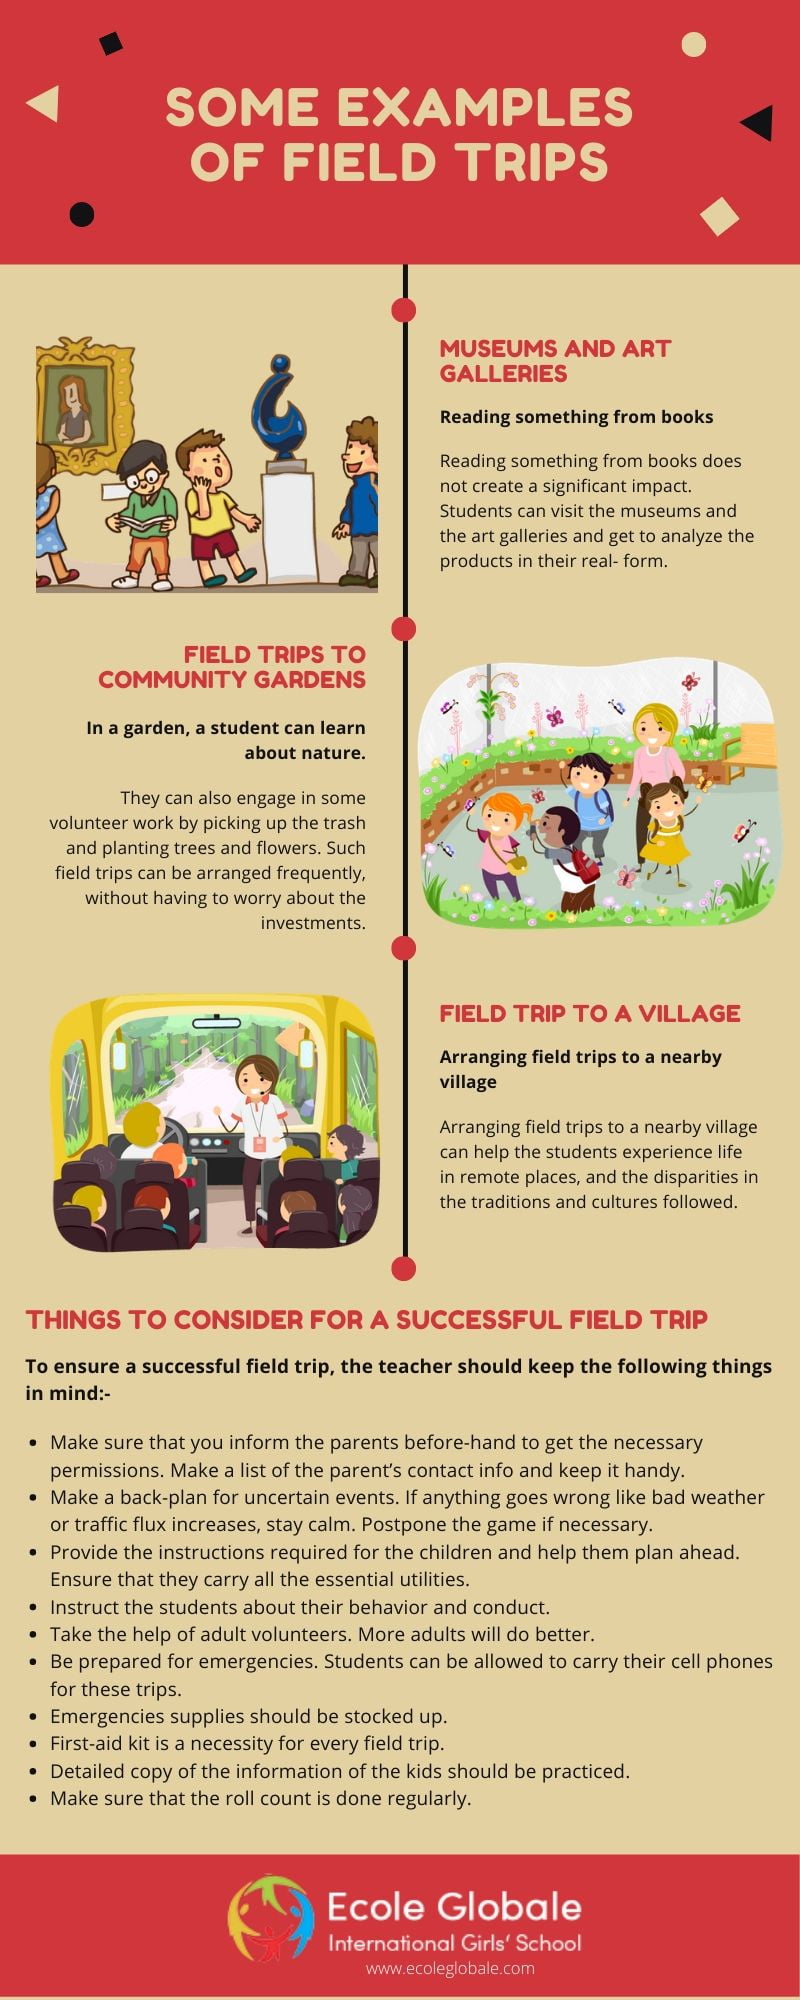 Why are field trips are important in child’s education?